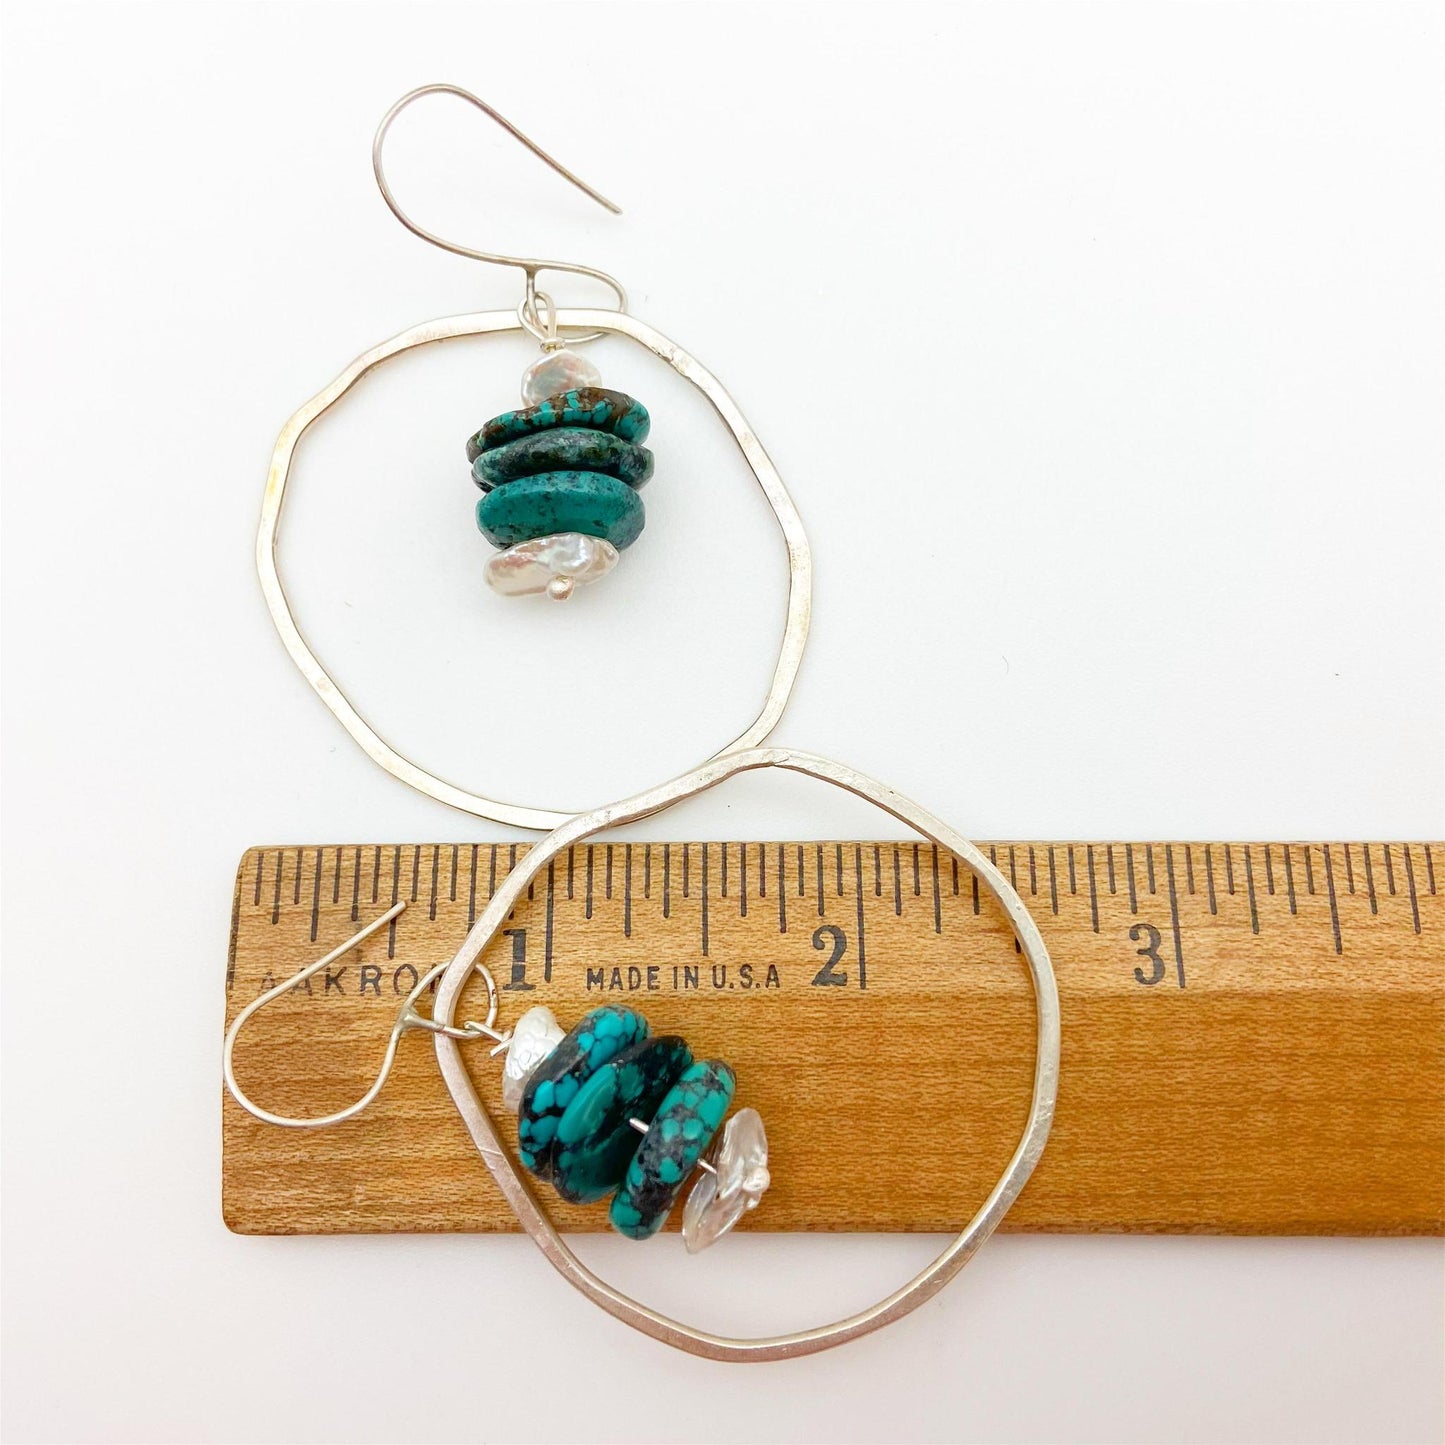 Sterling Earrings - Handmade with Stones - Mixed Media